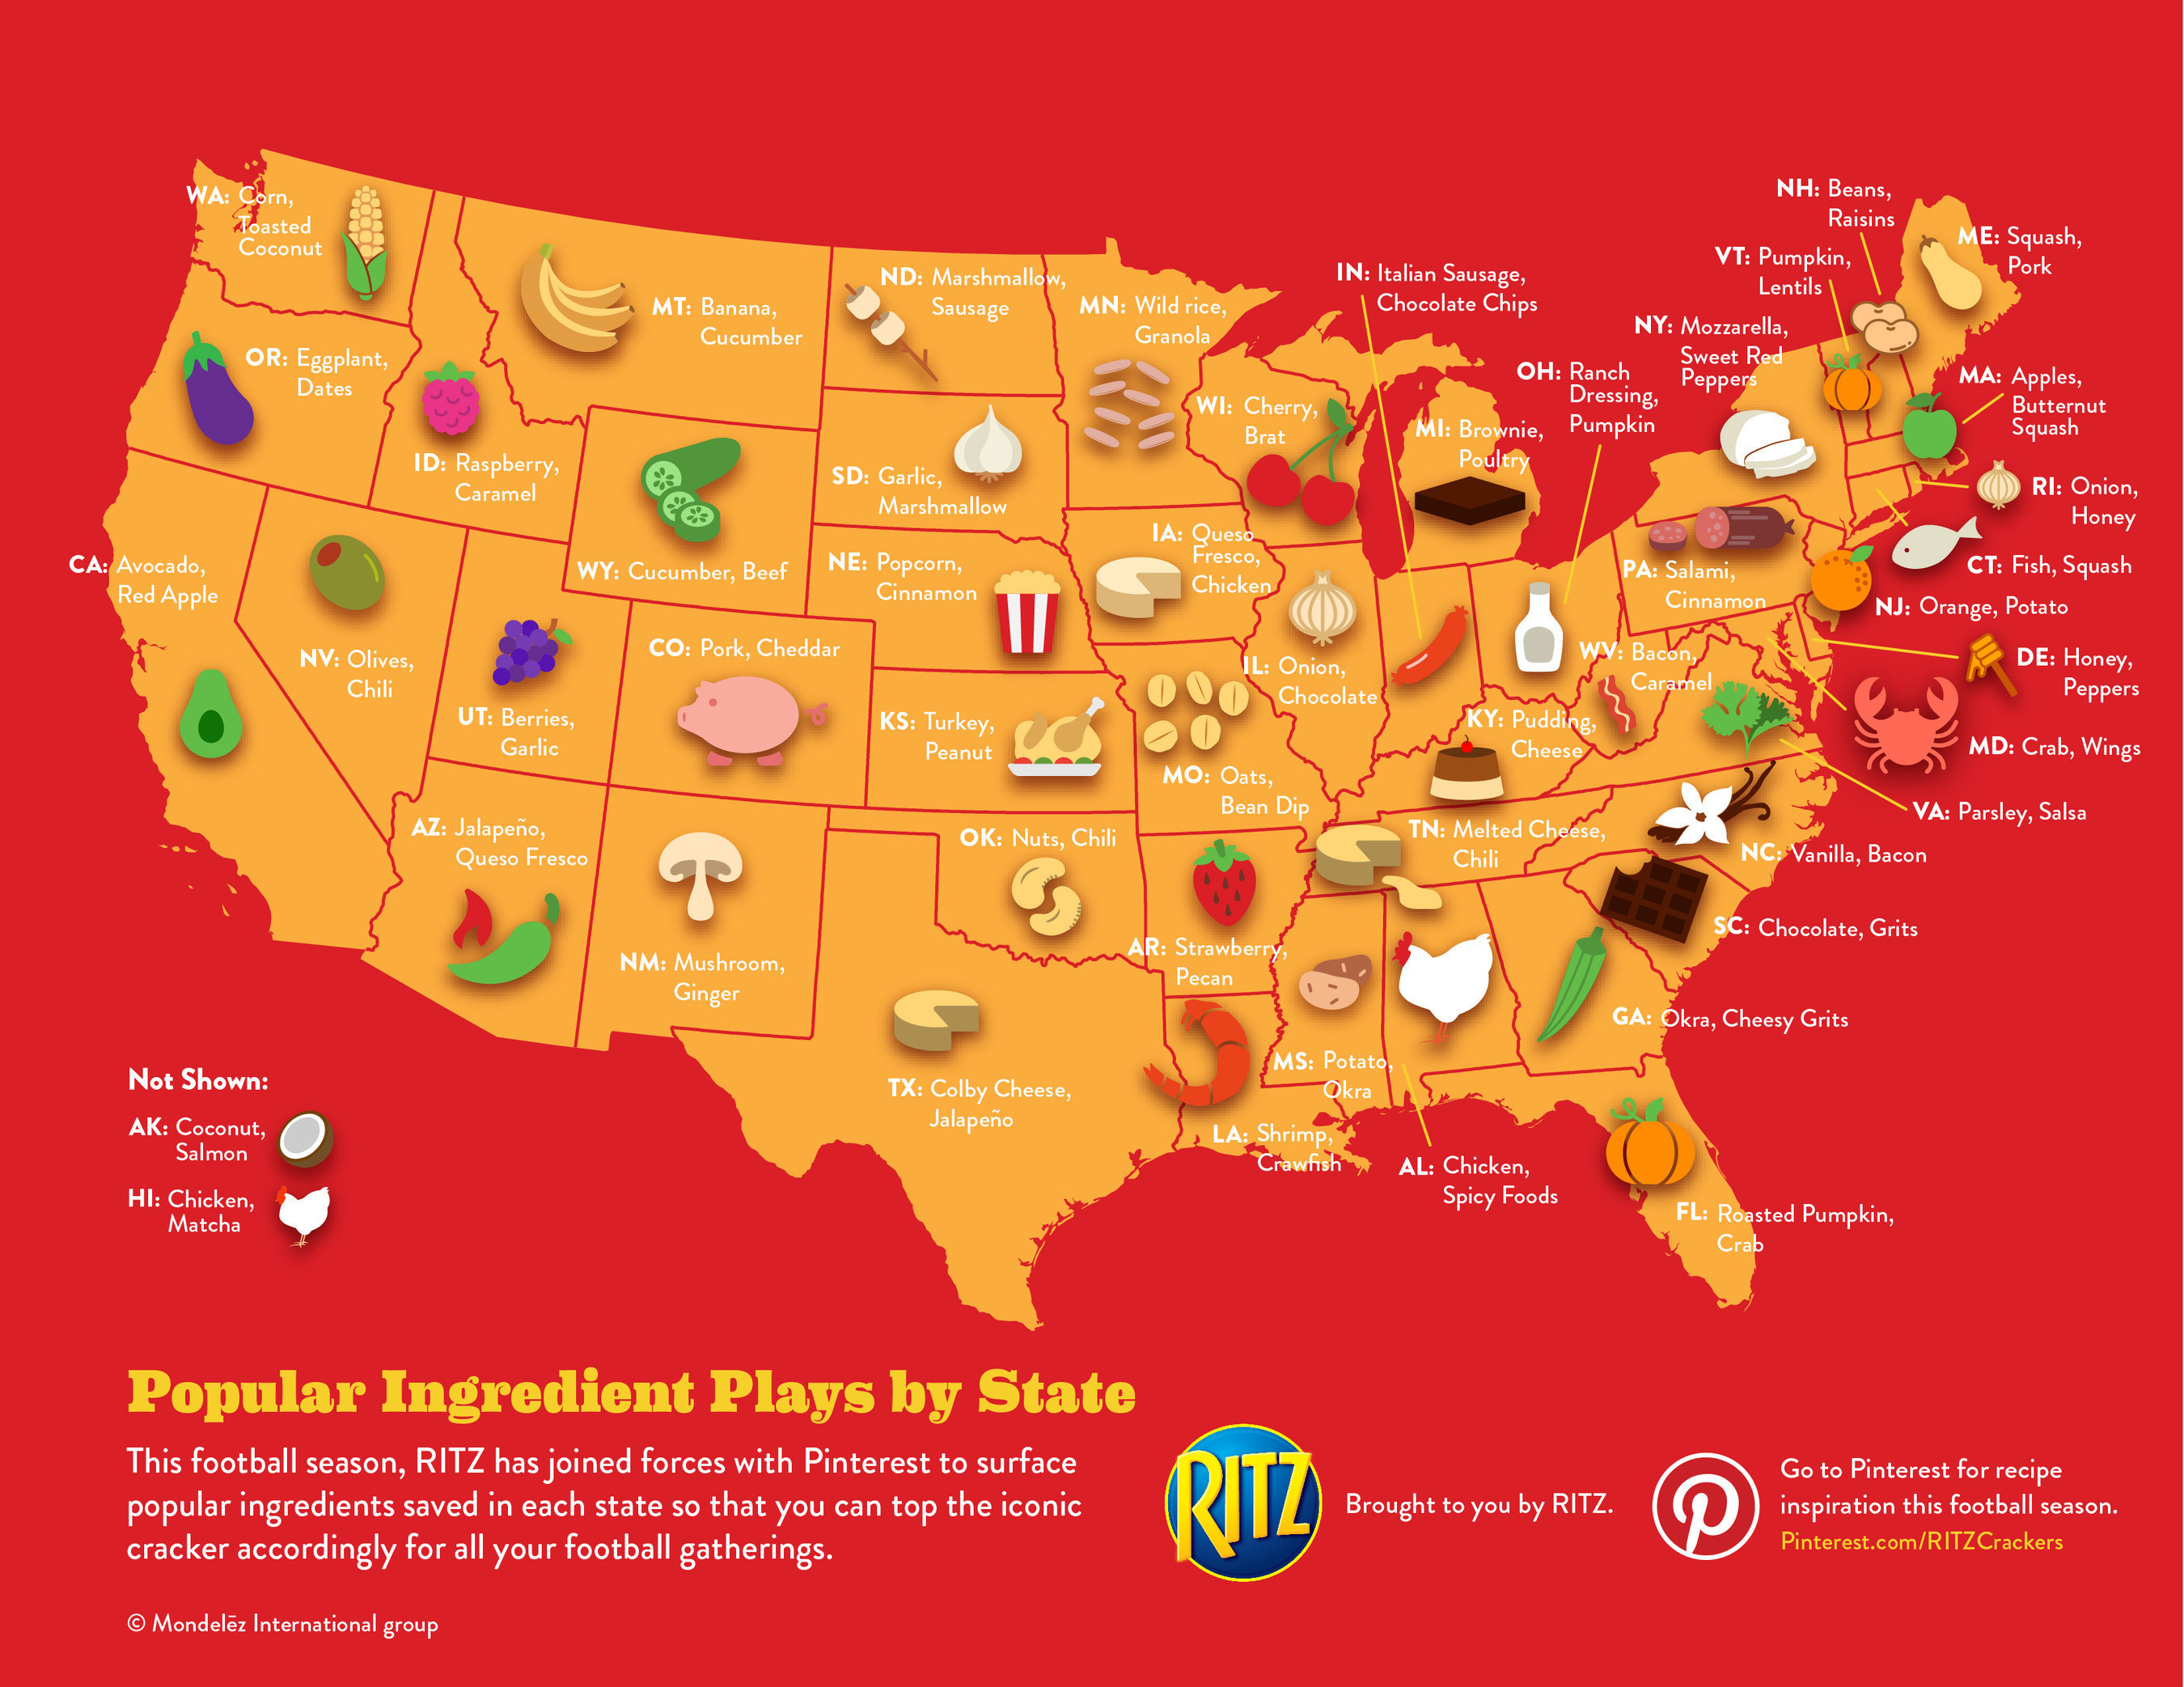 Popular Ingredient Plays by State, Brought to You by RITZ